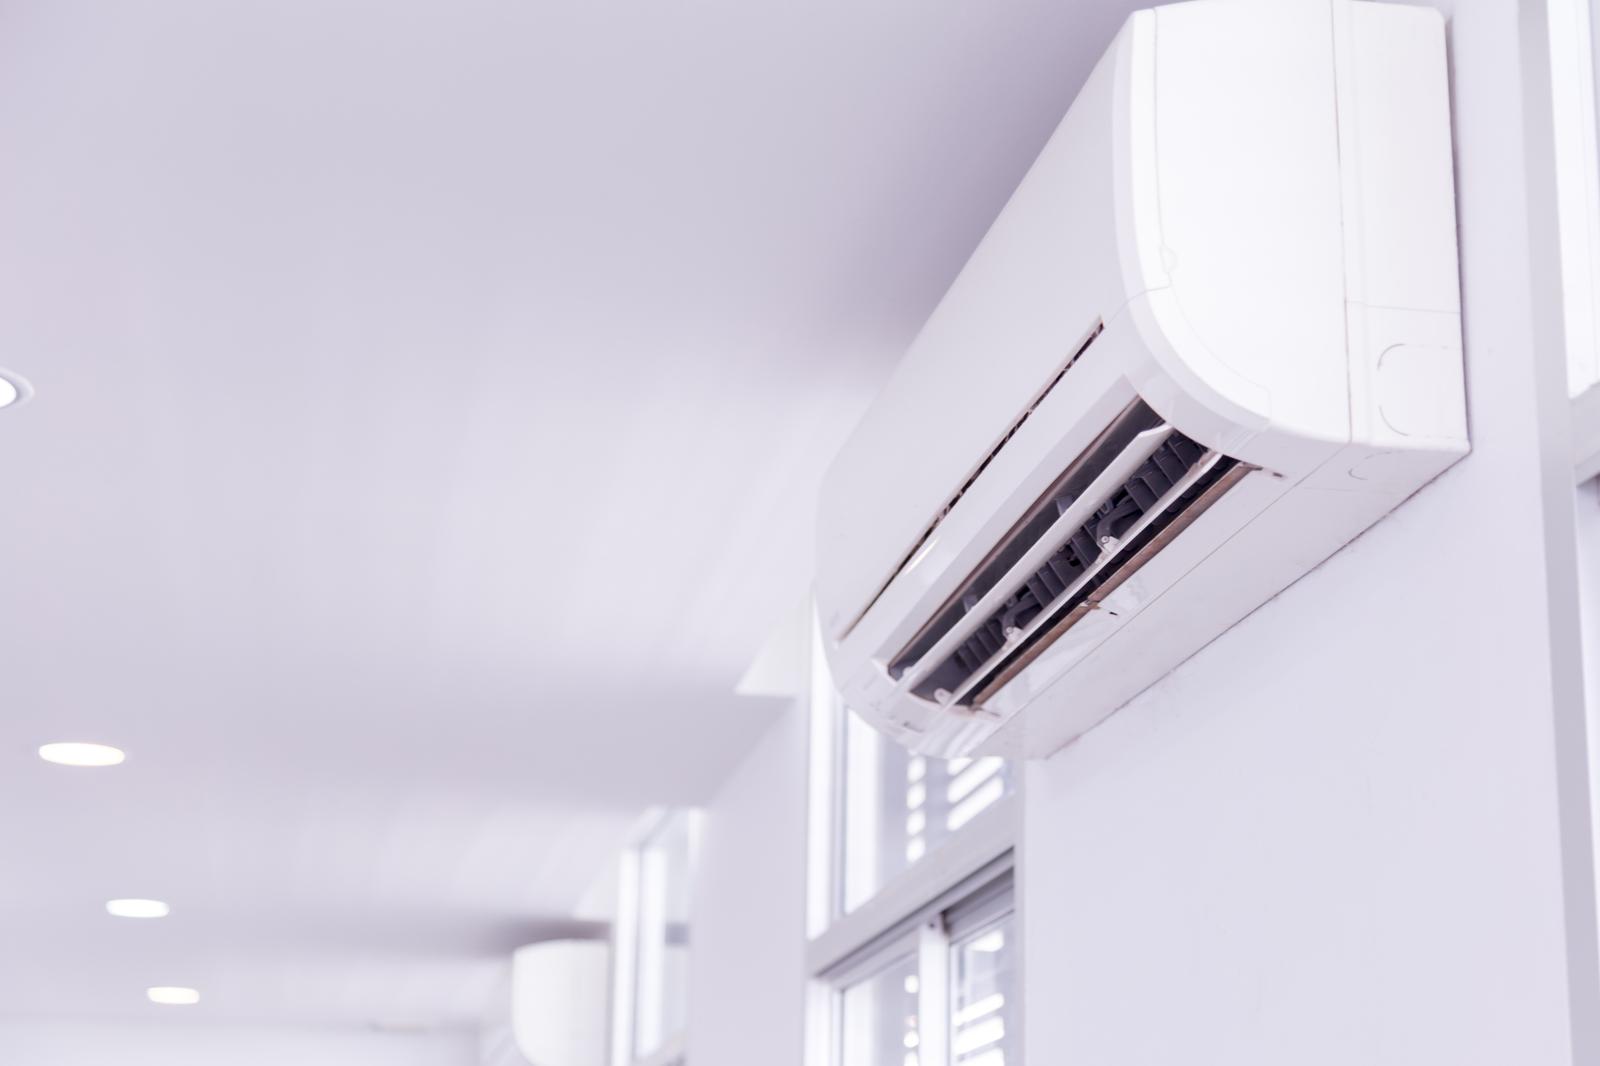 COMFORT AE AS - Installation of ventilation and air conditioning systems, cooling and air conditioning systems, heat pumps...